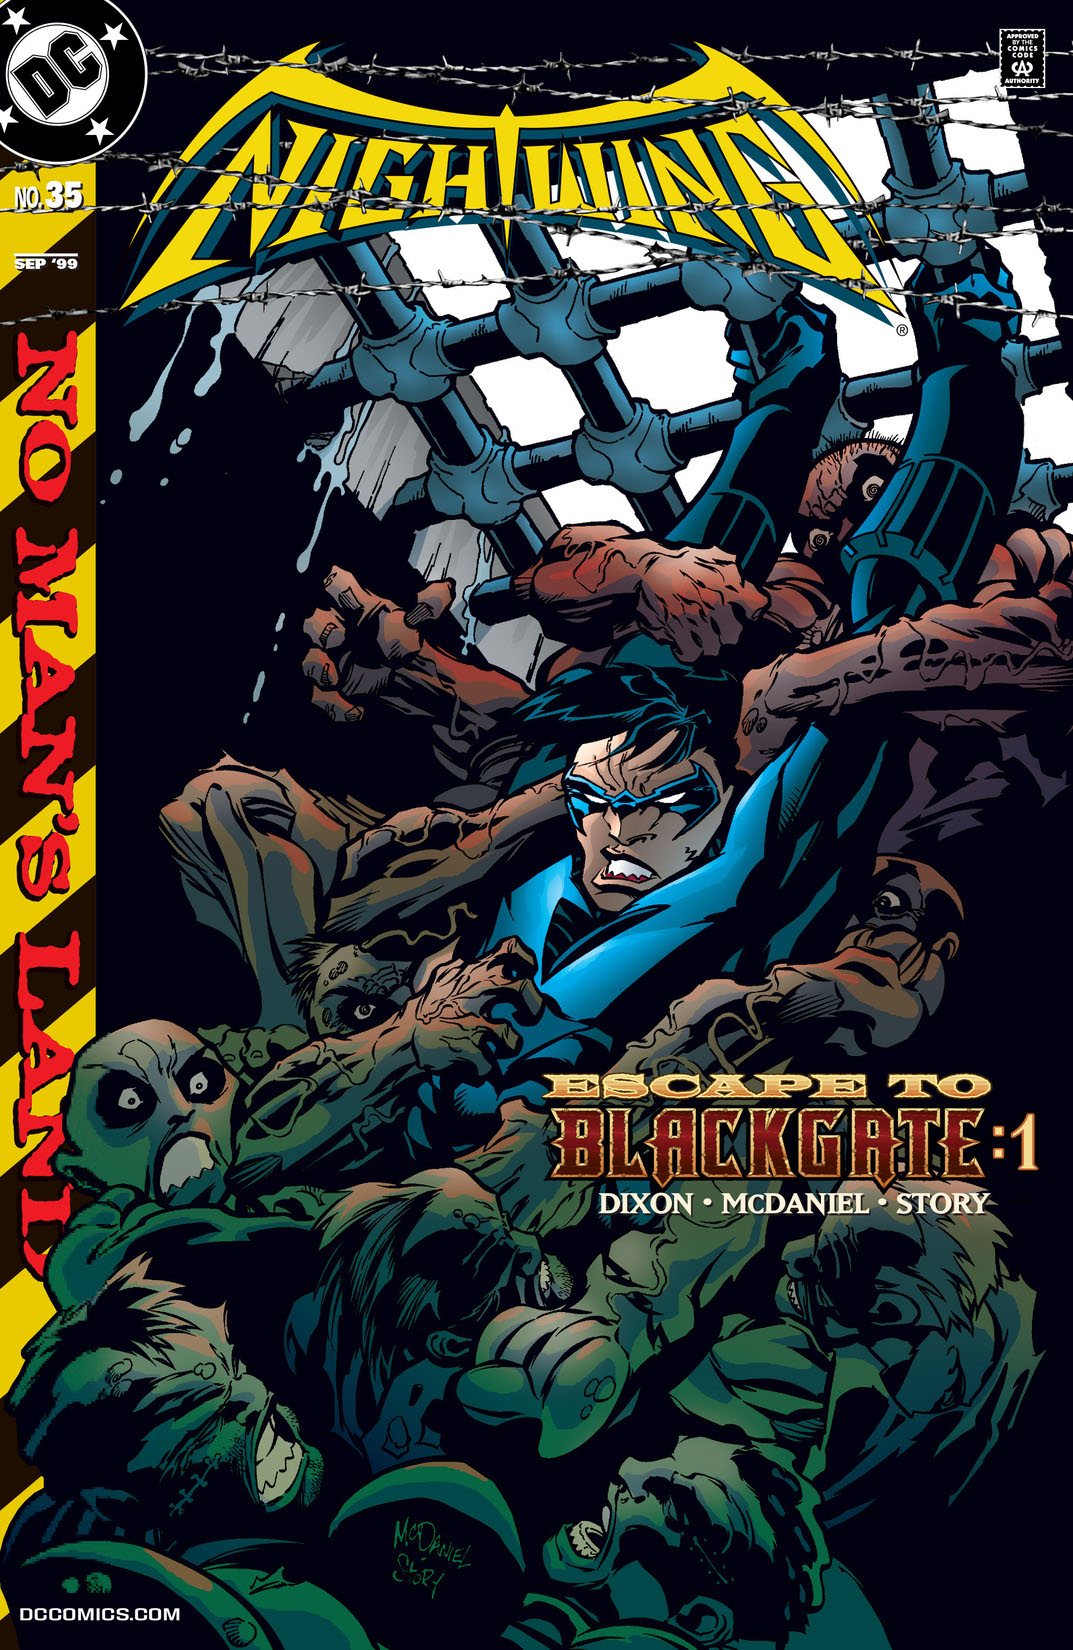 Nightwing (1996-) #35 preview images